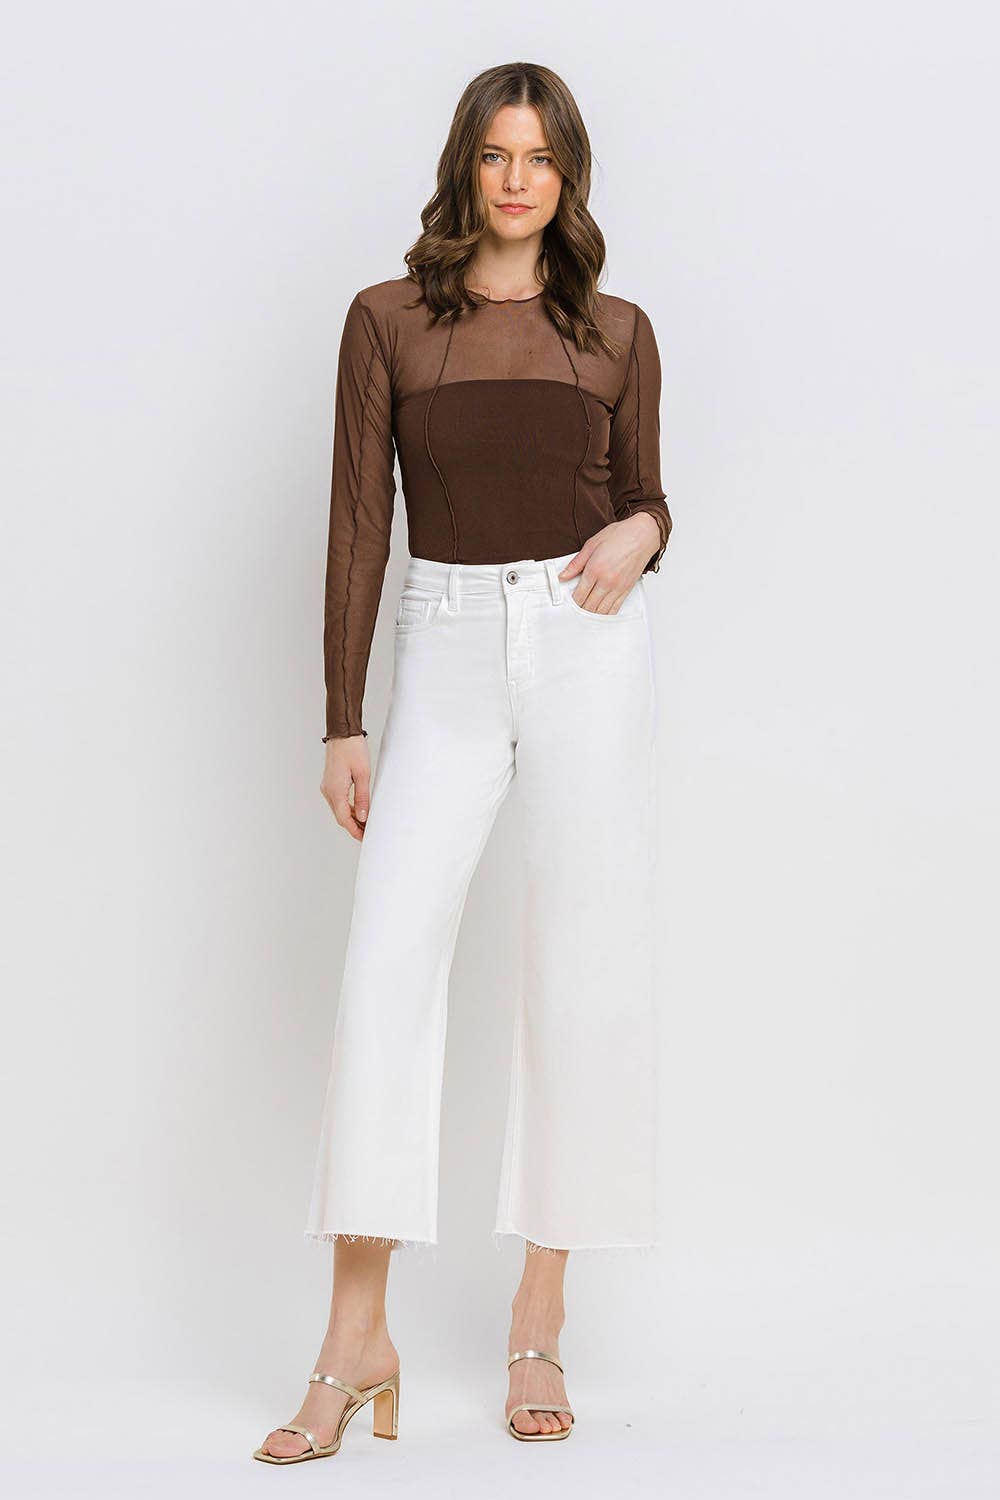 VERVET by FLYING MONKEY - HIGH RISE CROP WIDE LEG JEANS T5894WH: OPTIC WHITE / 24